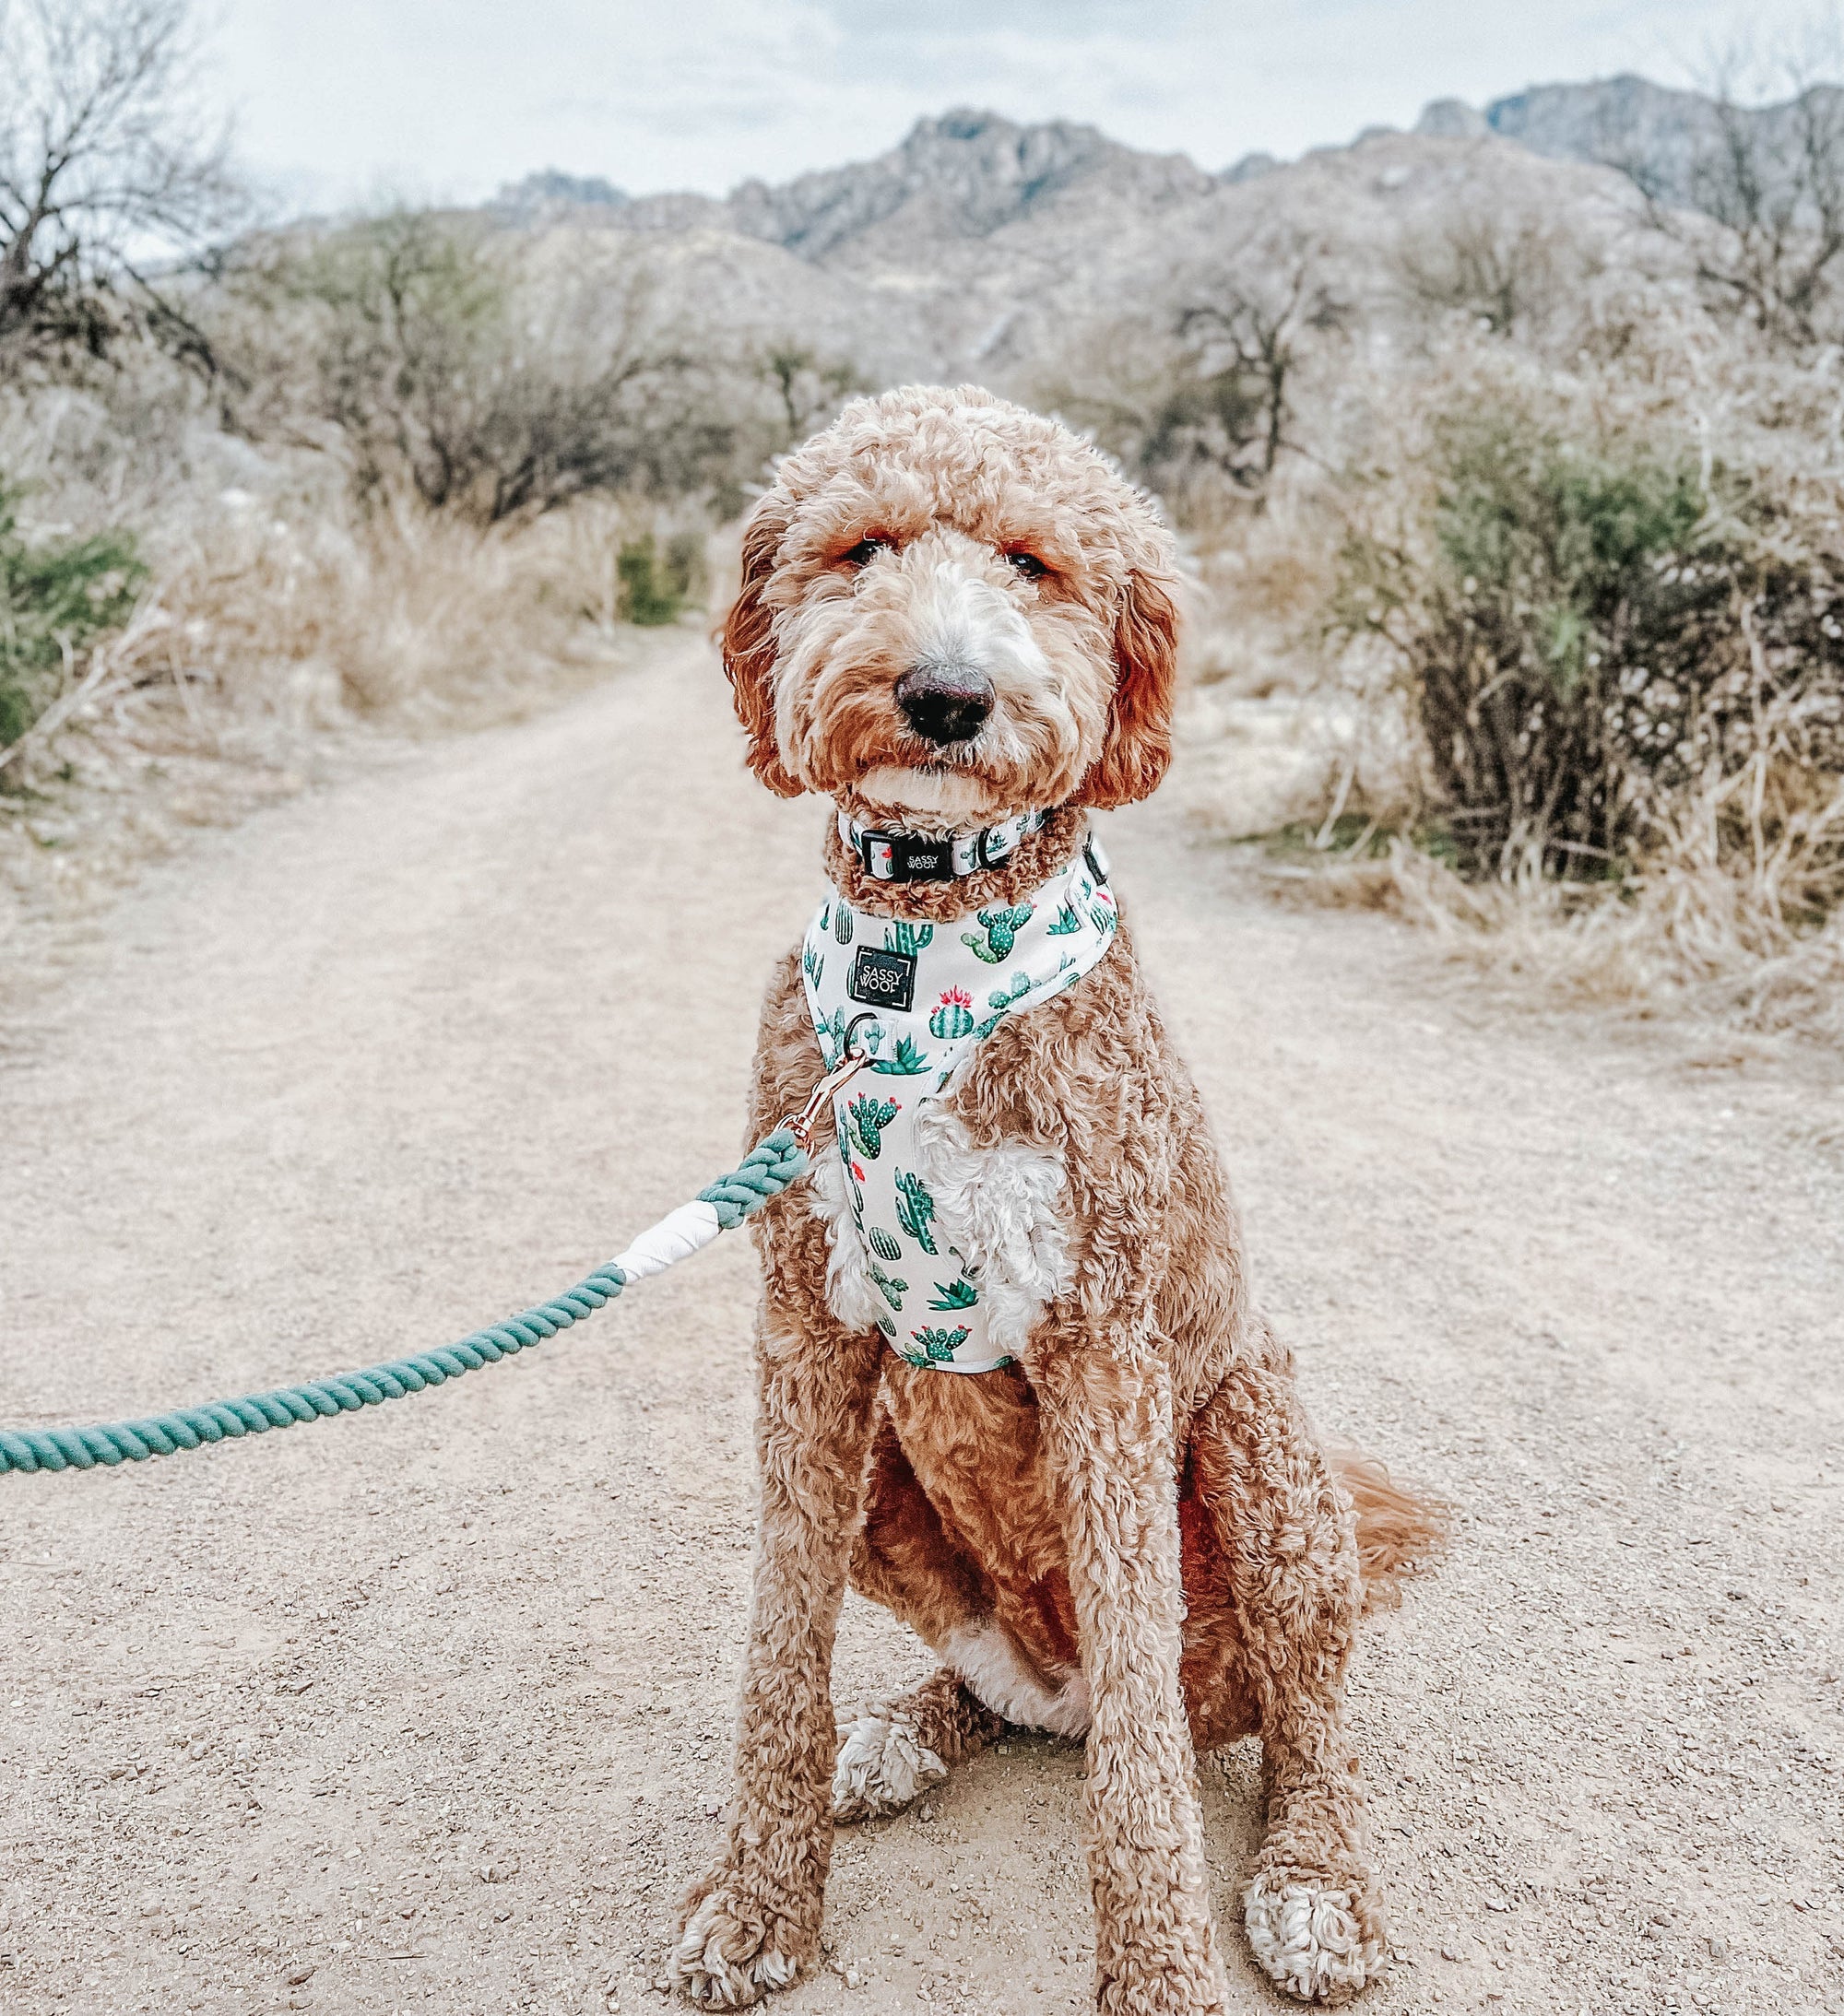 INFLUENCER_CONTENT | @PEACH_THEGOLDENDOODLE |